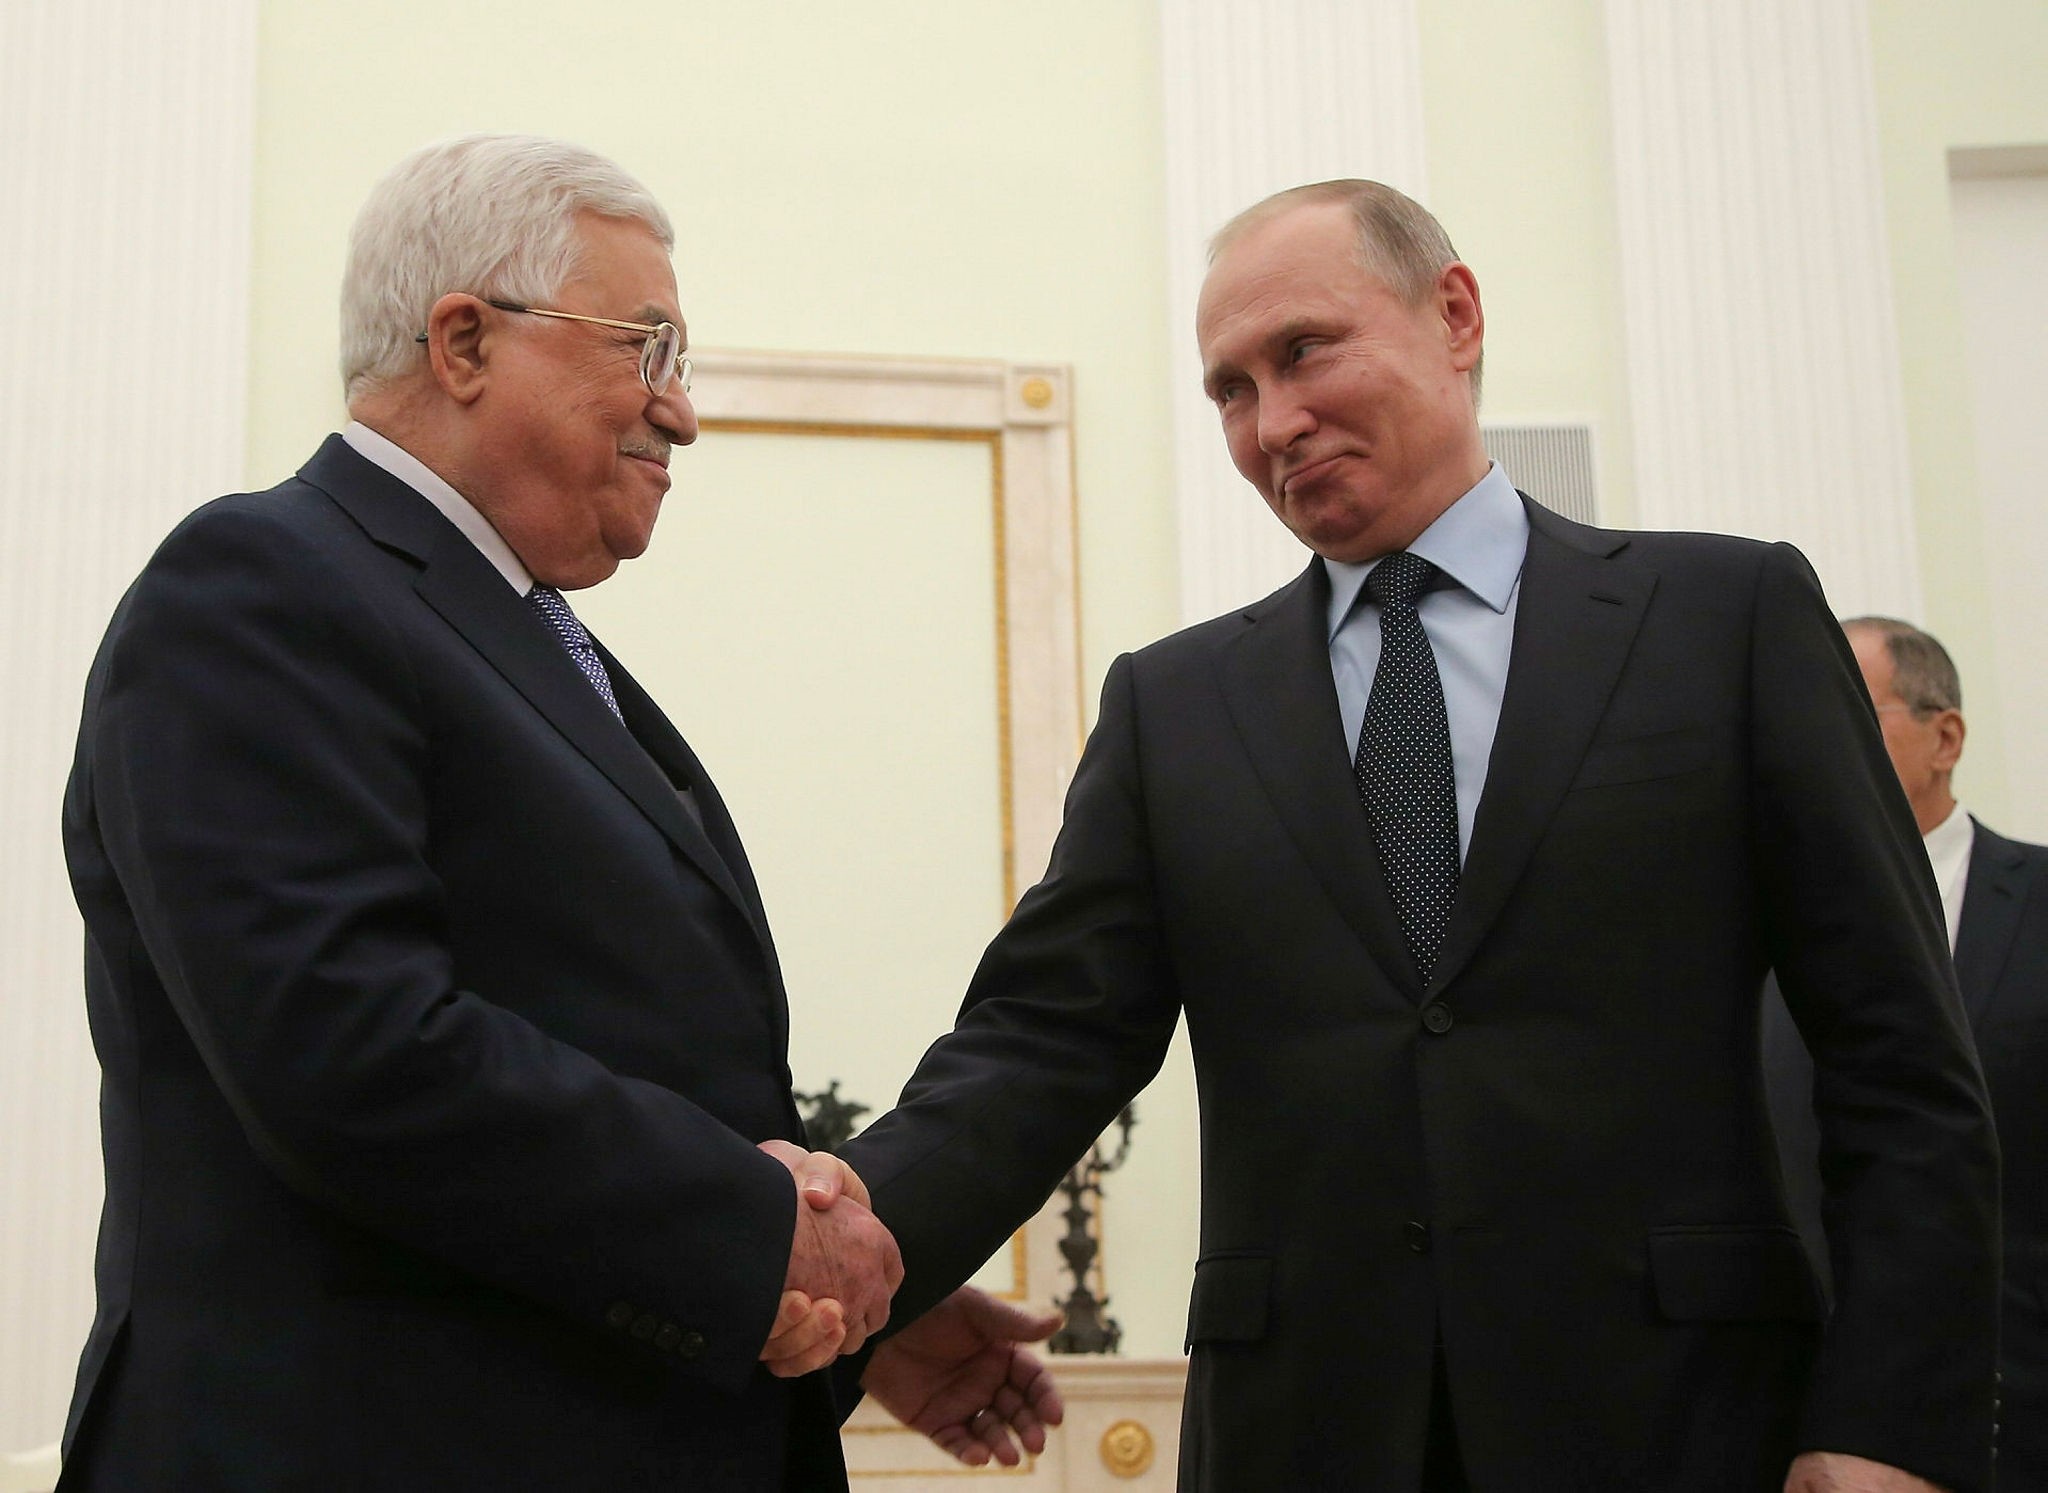 Russian President Vladimir Putin (R) shakes hands with Palestinian President Mahmoud Abbas during a meeting at the Kremlin in Moscow, Russia February 12, 2018. (Reuters Photo)